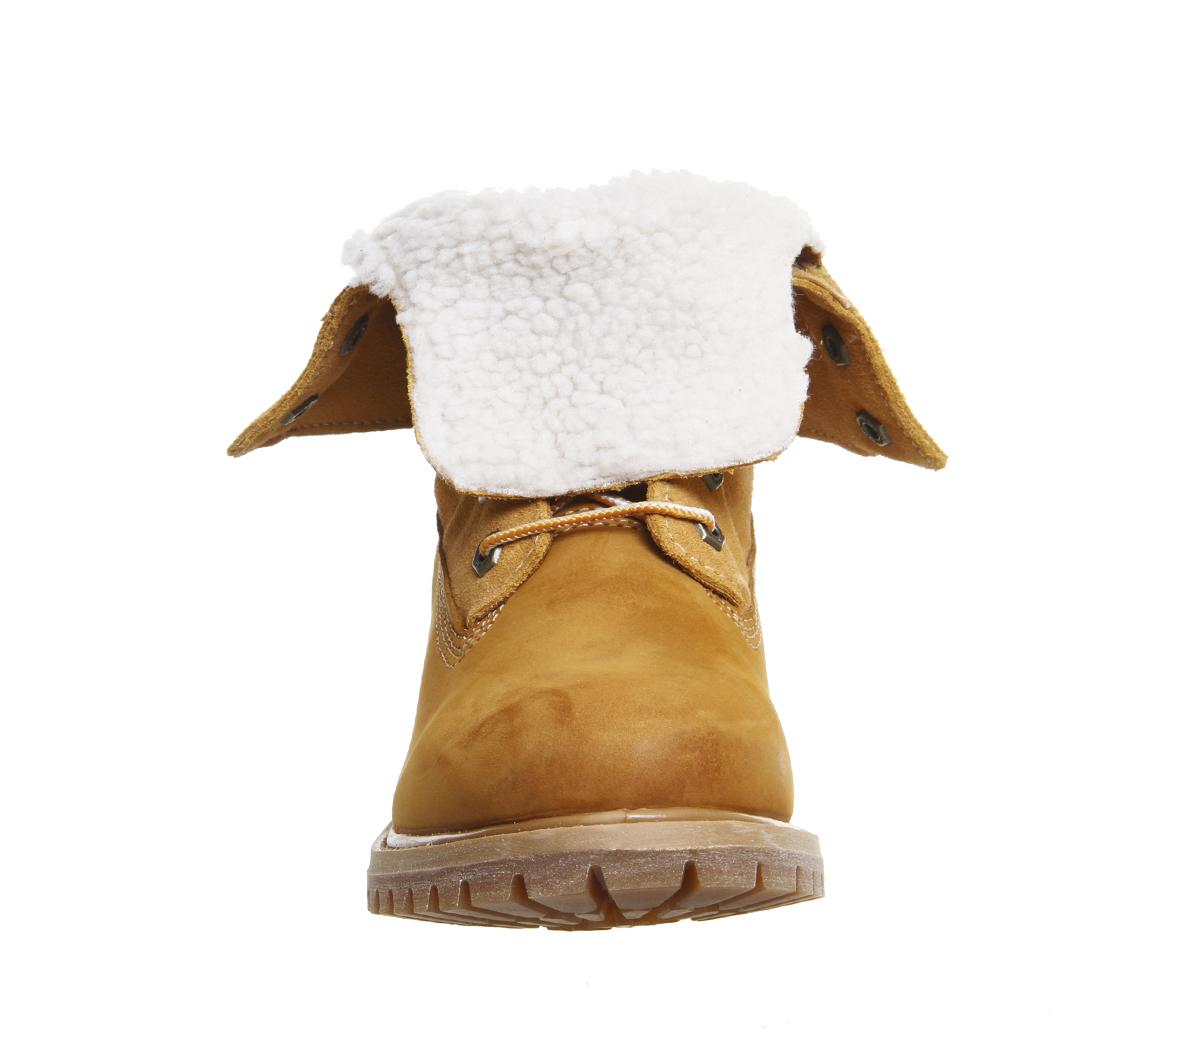 Timberland Teddy Fleece Boots in Natural | Lyst